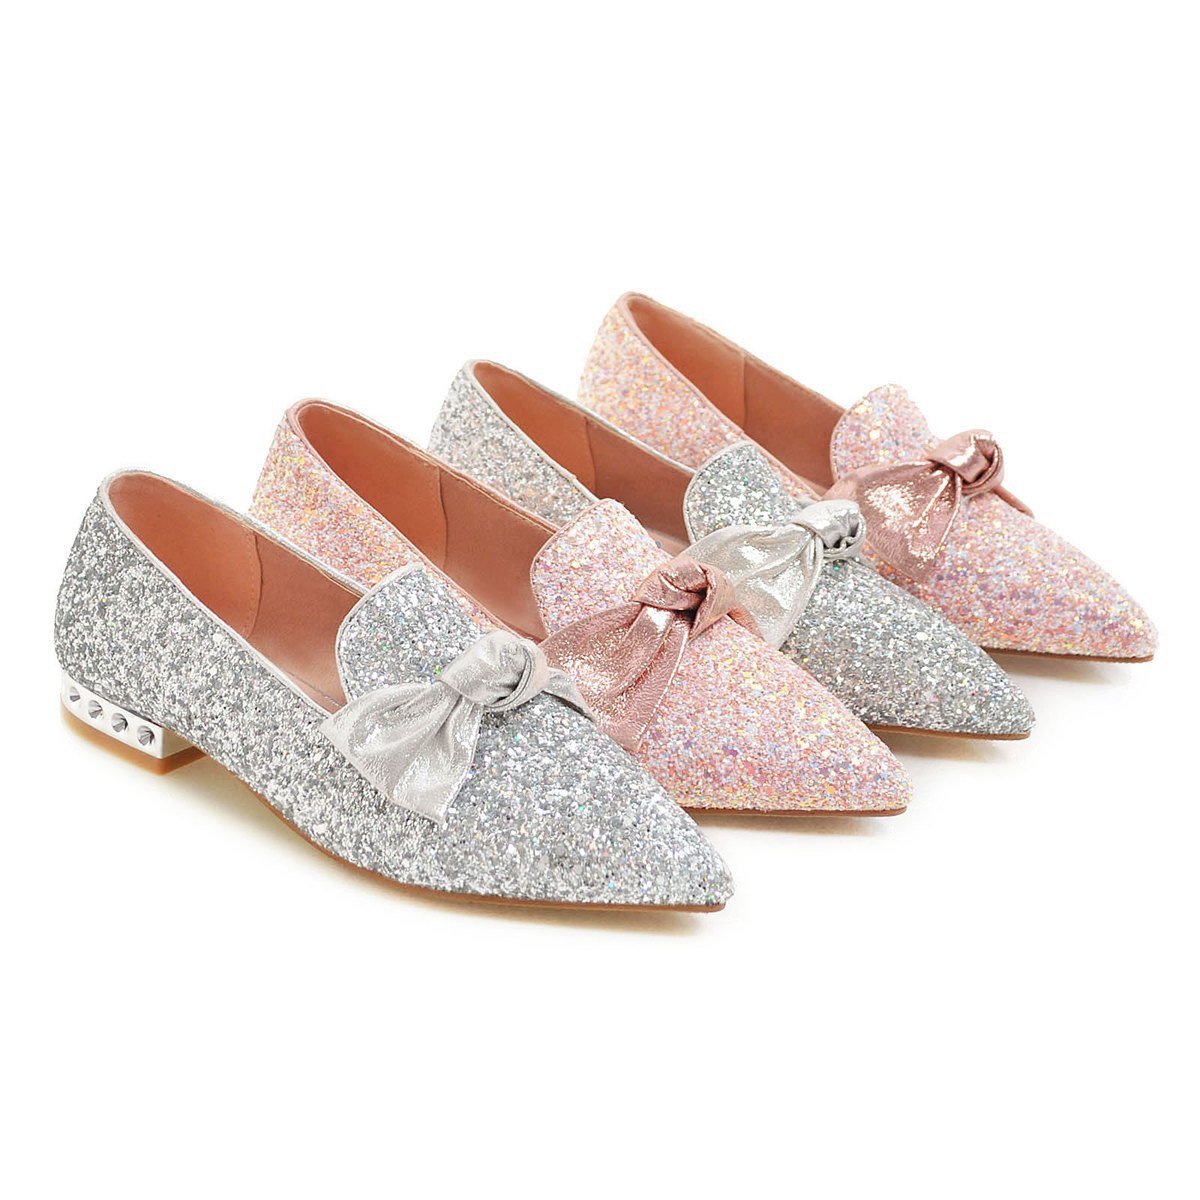 Woman's Sequin Bow Shallow-mouthed Low Heeled Chunky Pumps Shoes